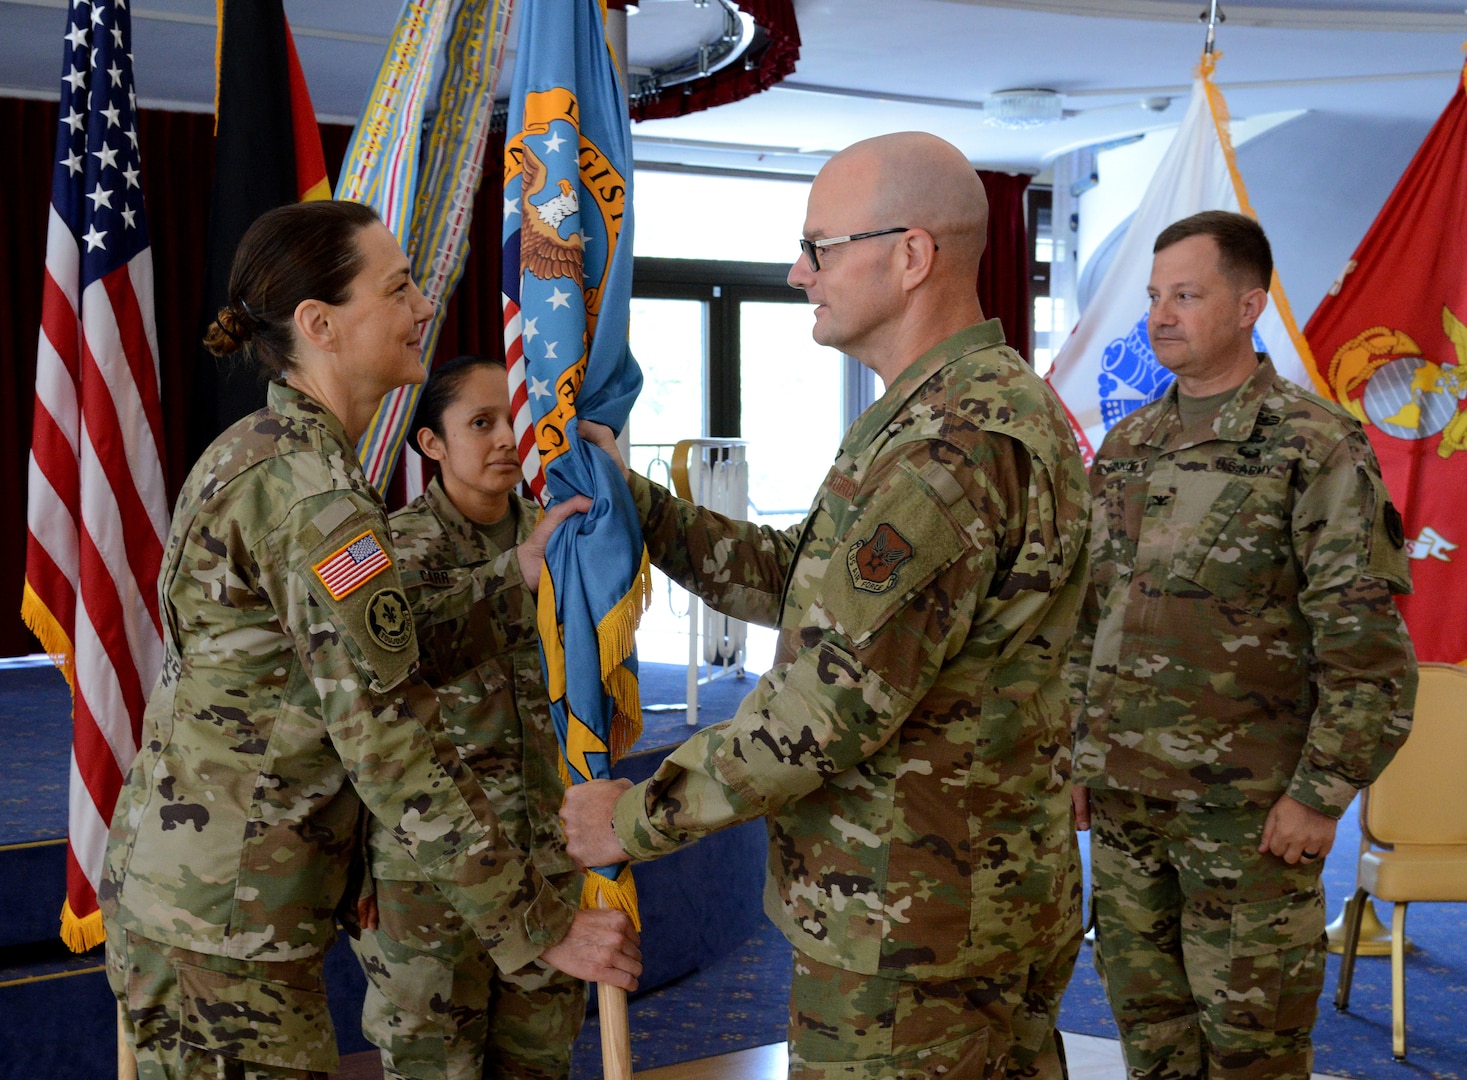 Air Force Maj. Gen. Allan Day, DLA Logistics Operations director, presents the colors to Army Col. Krista Hoffman, incoming DLA Europe & Africa commander, during a change of command ceremony June 26 in Kaiserslautern, Germany, as Army Master Sgt. Roxanna Carr (middle left), DLA E&A senior enlisted leader, and Army Col. Theodore Shinkle (right), outgoing commander, look on.